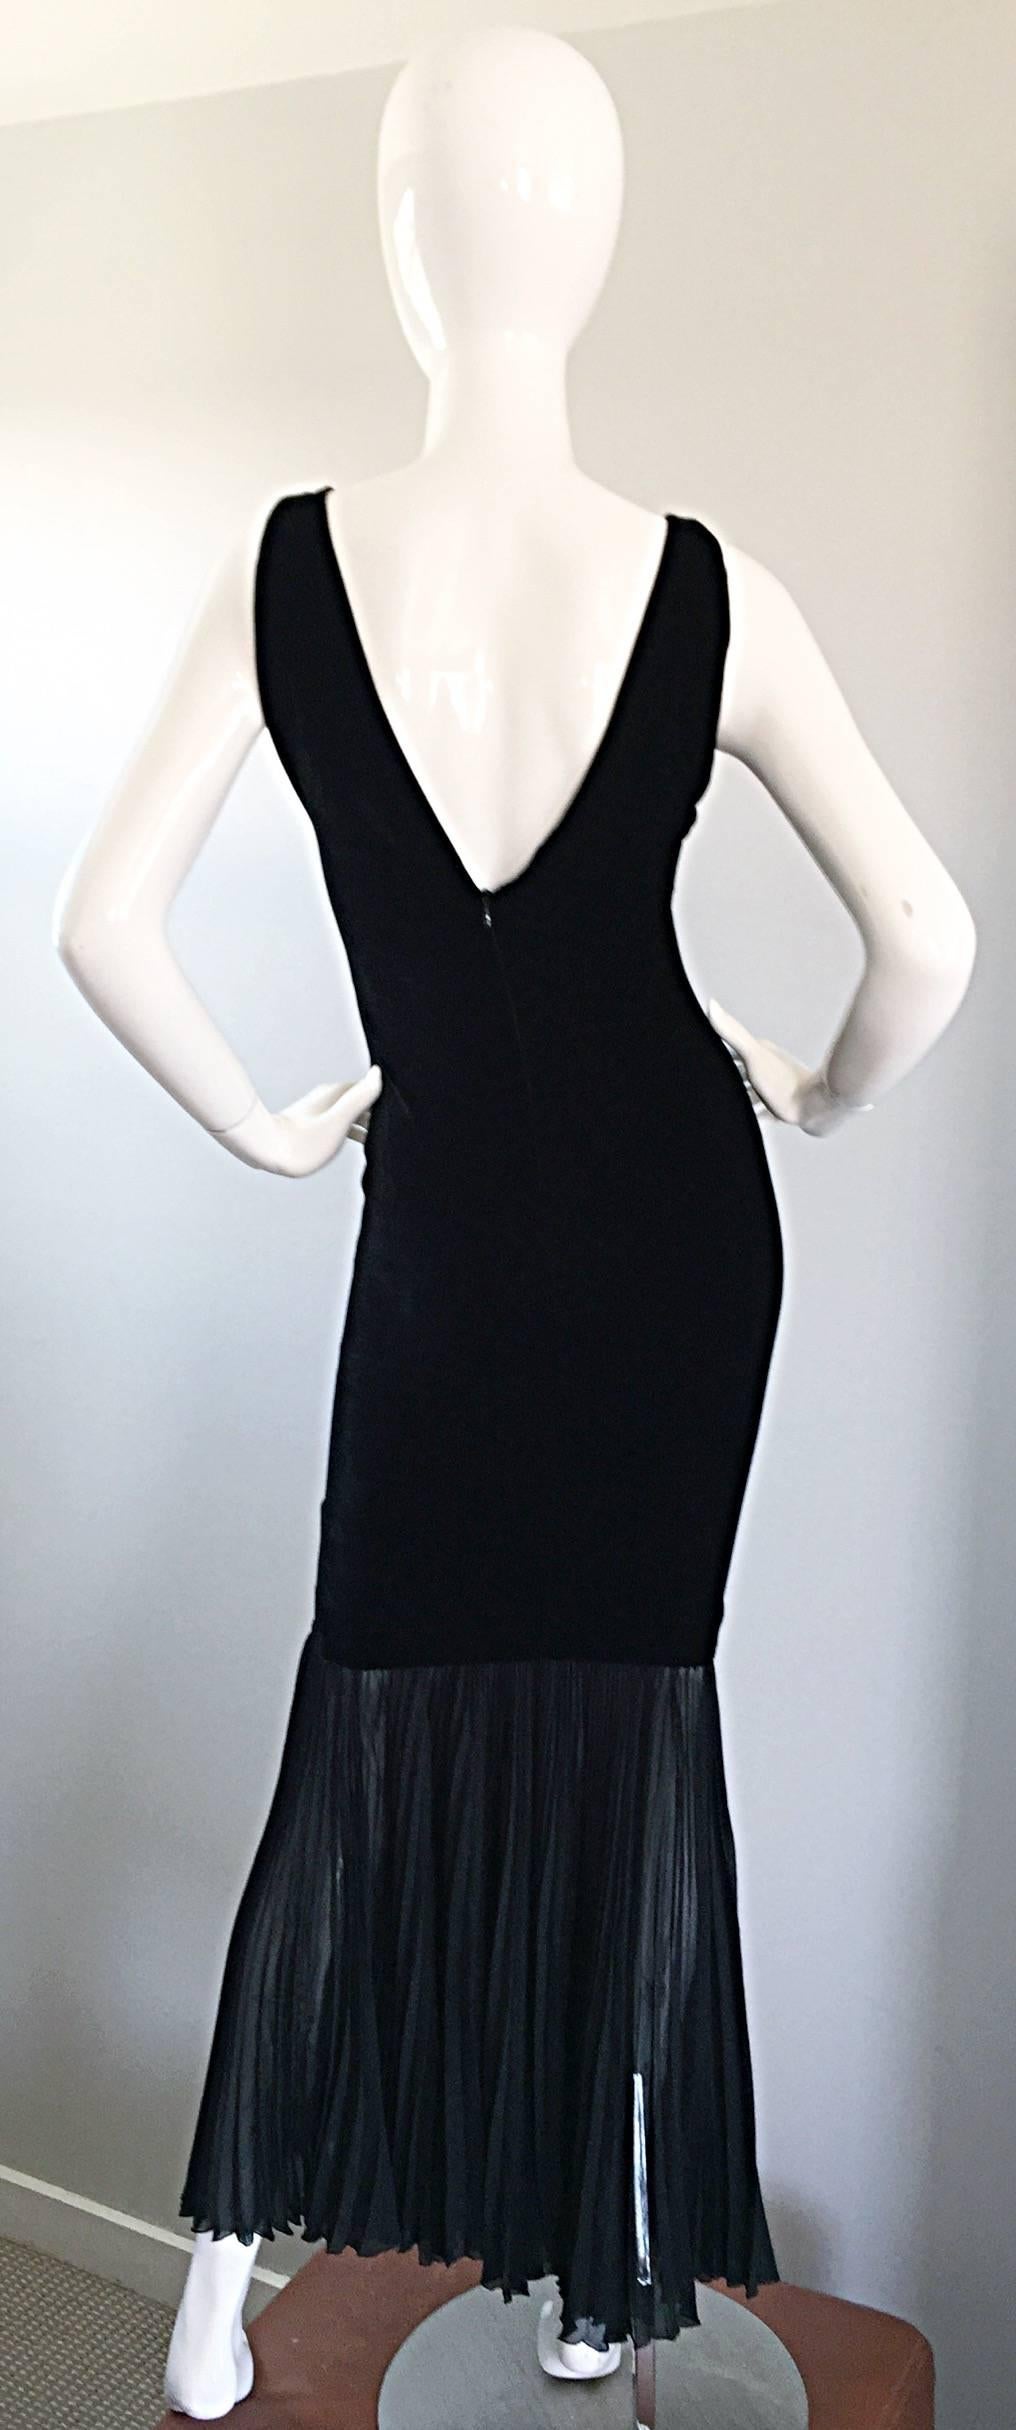 Sensational vintage 90s JEAN PAUL GAULTIER black silk velvet mermaid evening dress! Words cannot even begin to describe how utterly flattering this dress is on the body! Masterfully cut to flatter every curve. Boddcon on the top, with a black silk